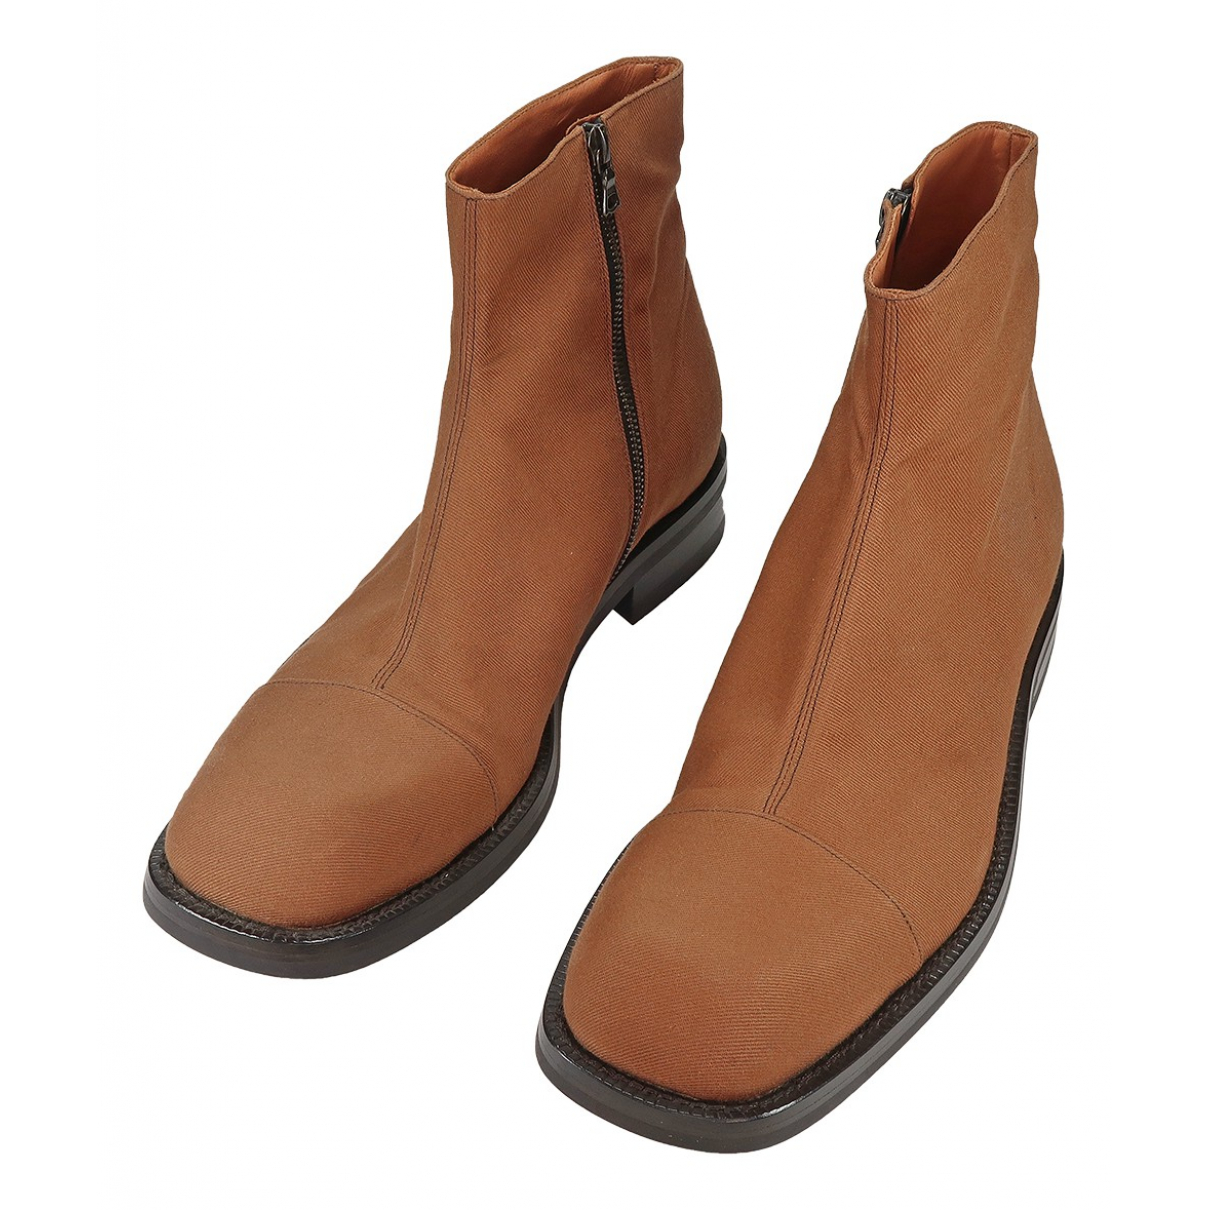 Cloth boots Special price for a limited time Ranking TOP4